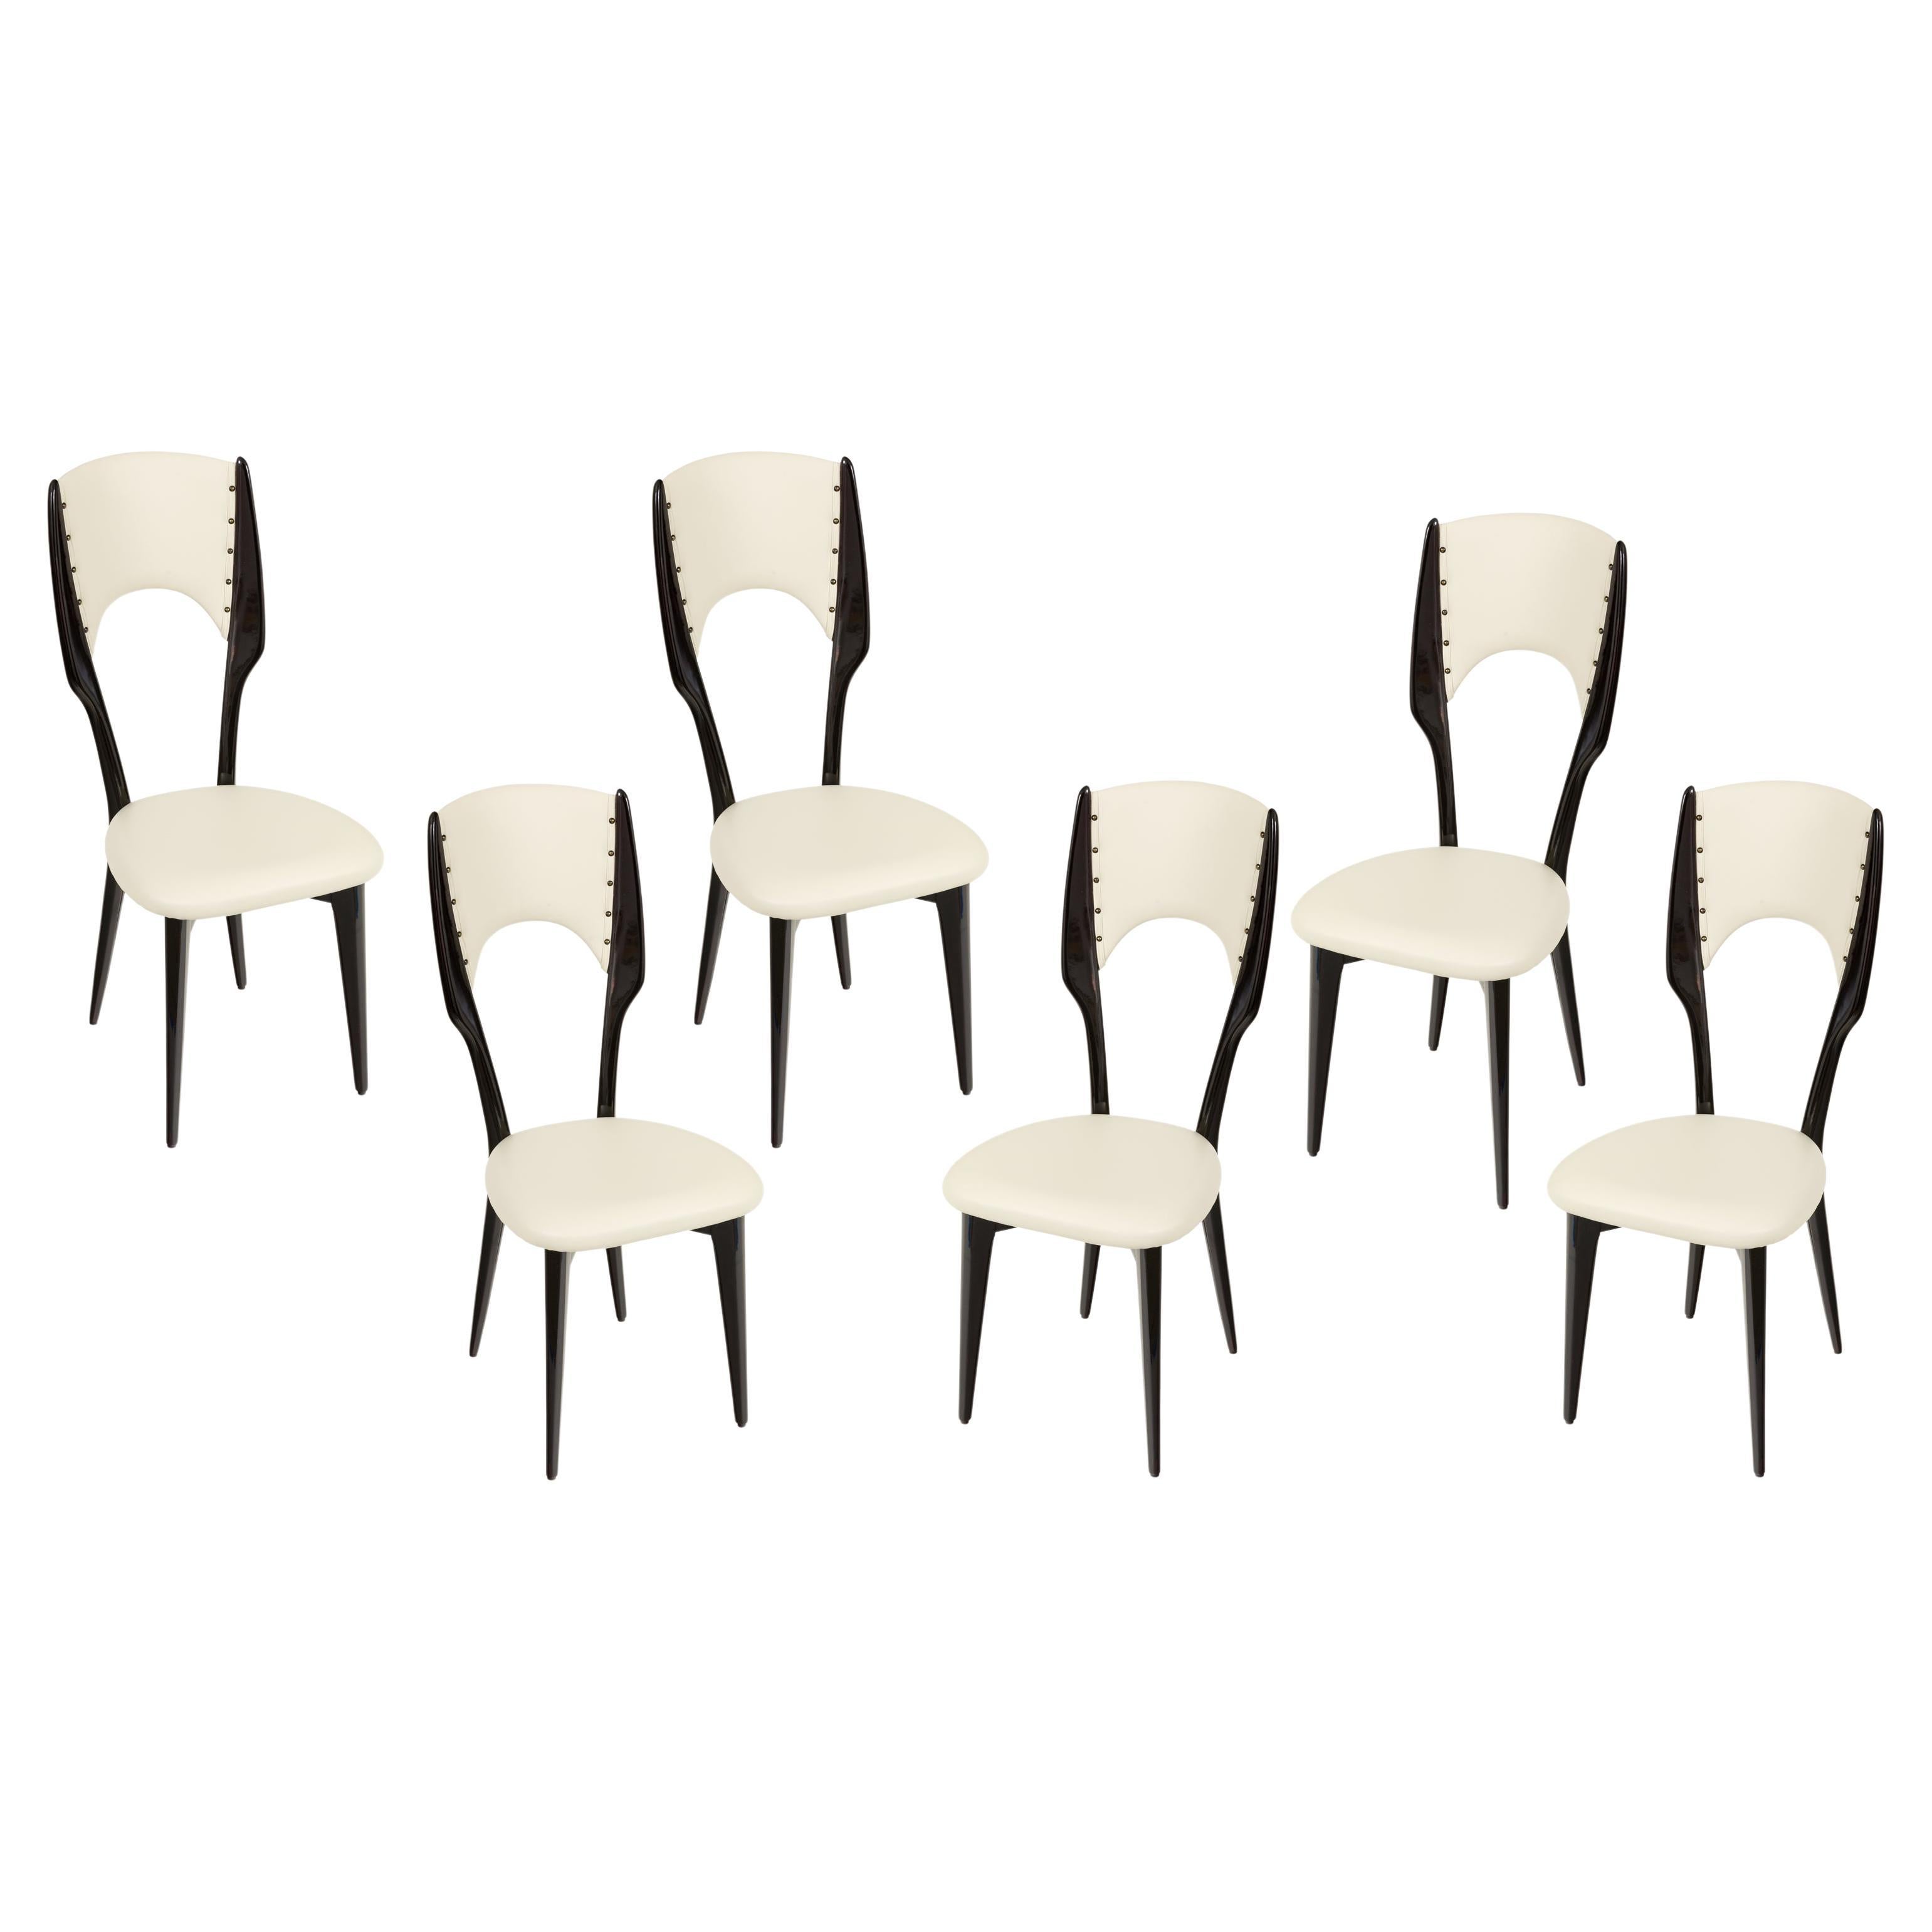 Mid-Century Black Lacquer & White Leather Dining Chairs, Italy 1950s